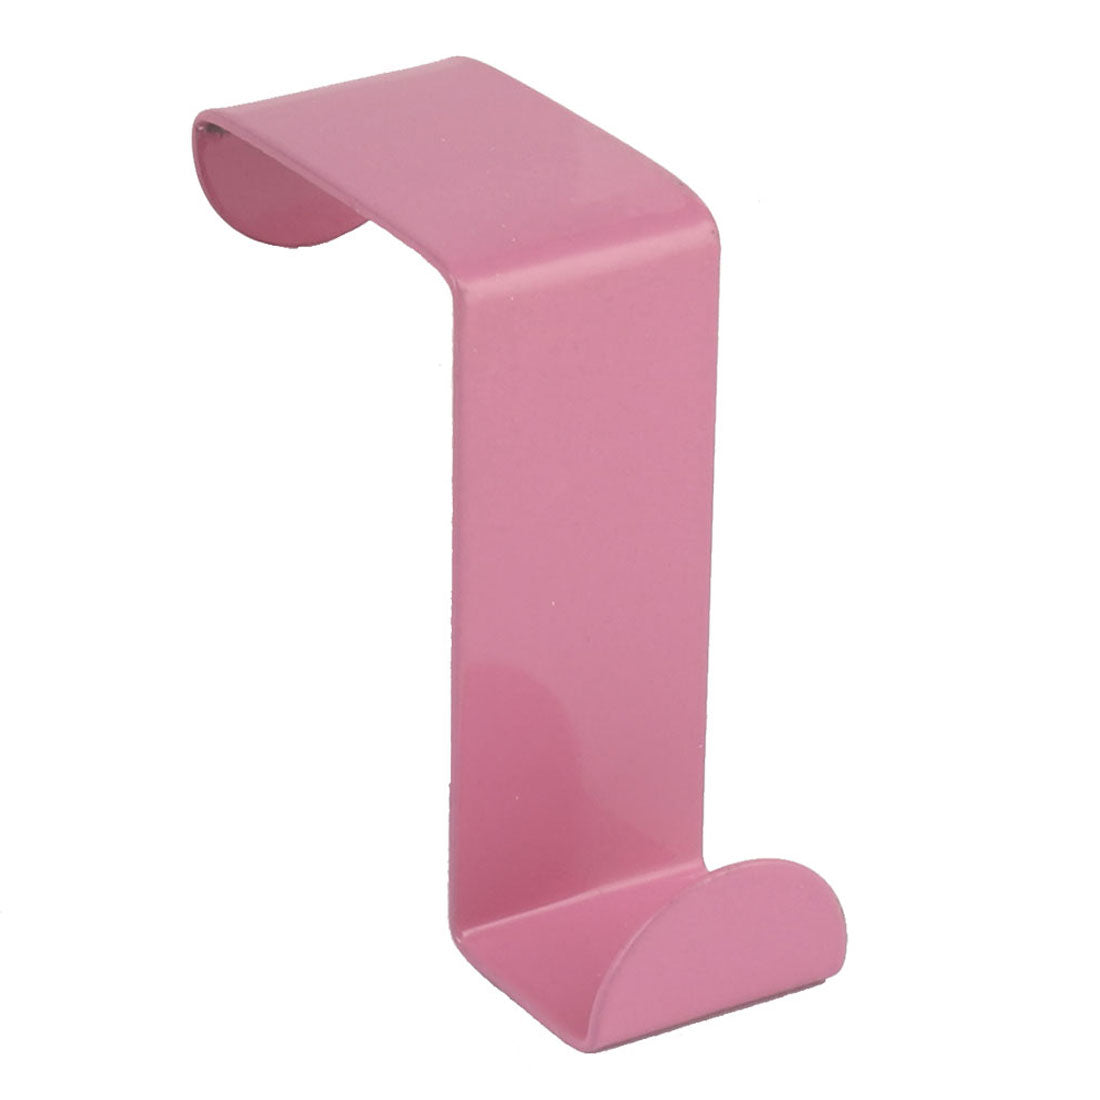 uxcell Uxcell Household Metal Z Shaped Over Door Hooks Clothes Towel Hanger Holder Pink 2 Pcs